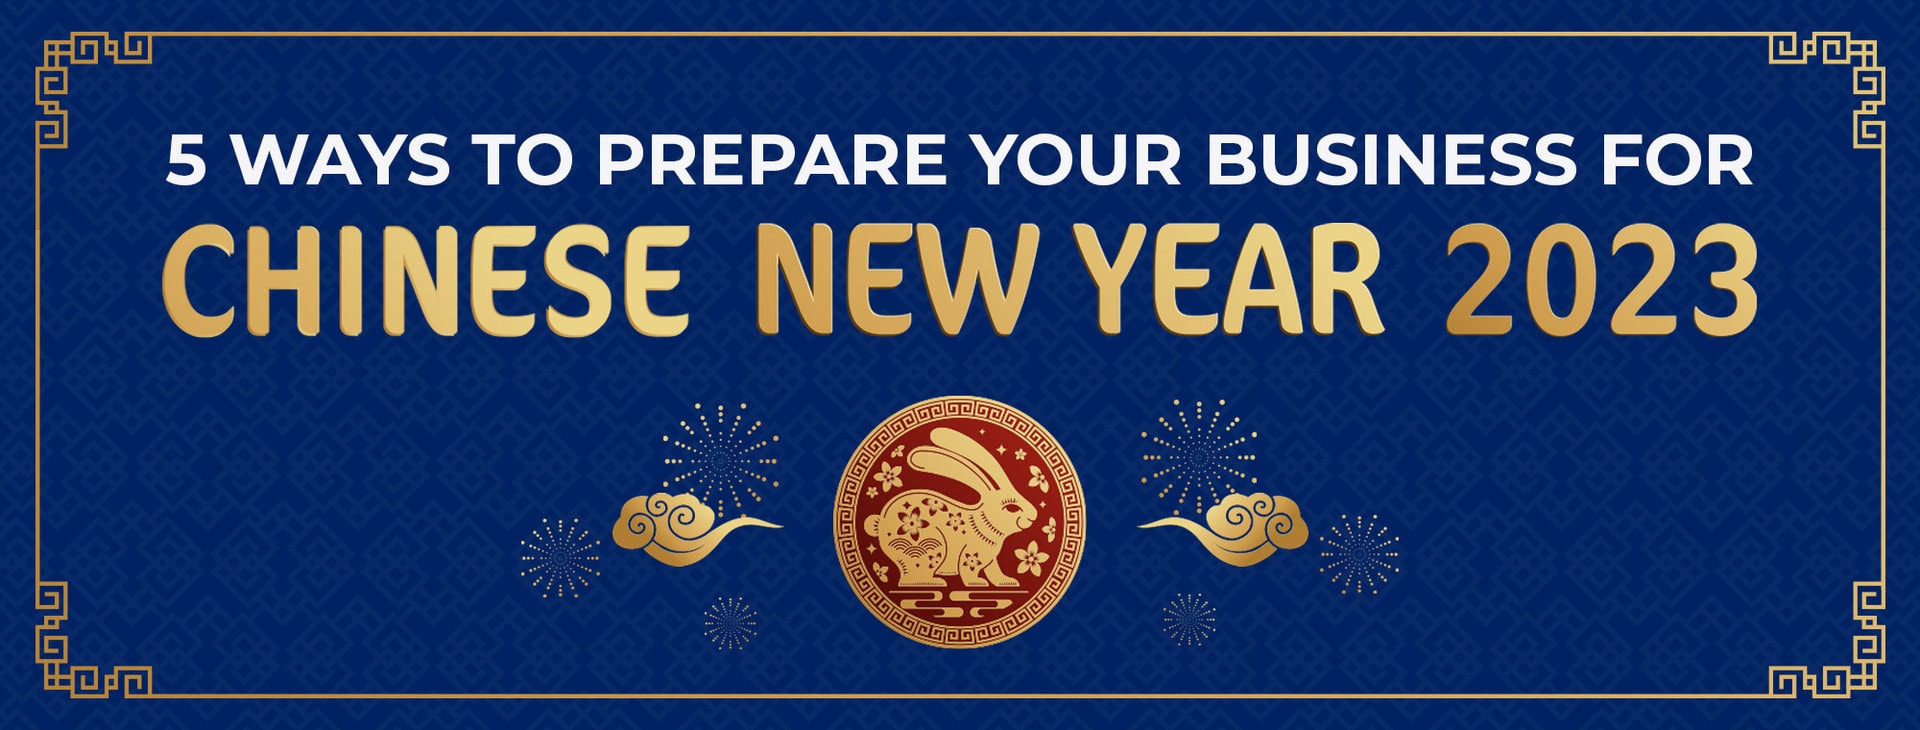 5 Ways to Prepare Your Business for Chinese New Year 2023